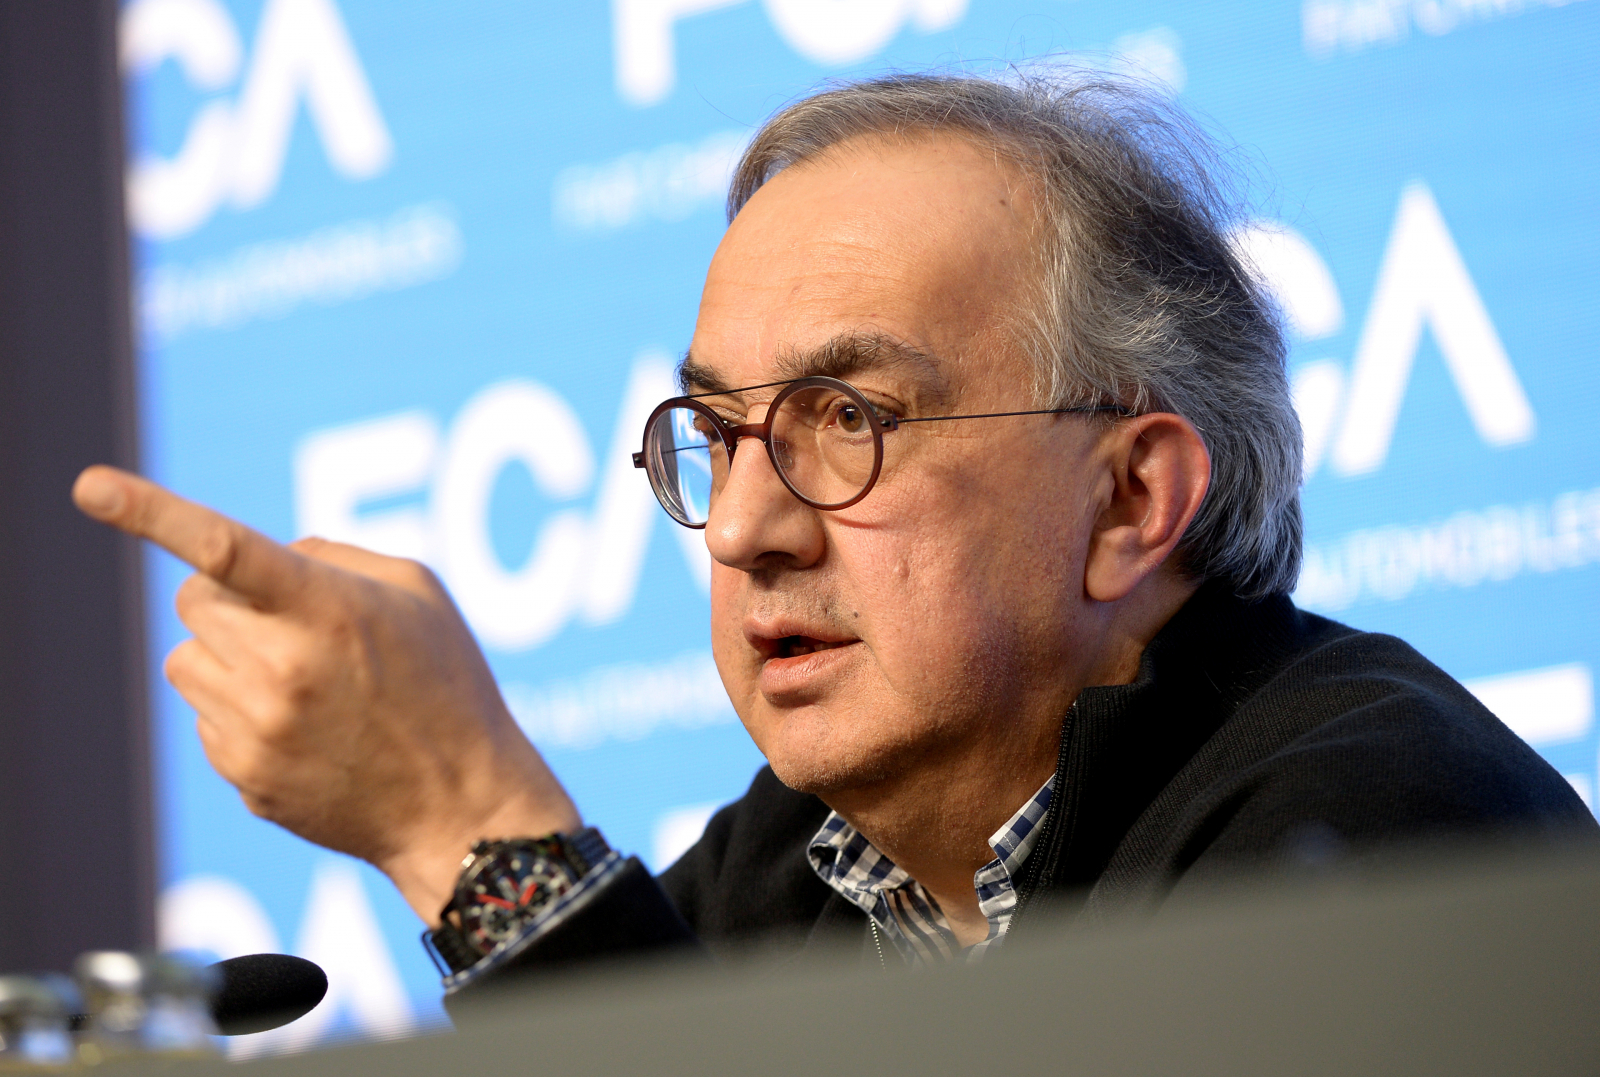 Sergio Marchionne, saviour of Fiat and Chrysler, dies suddenly